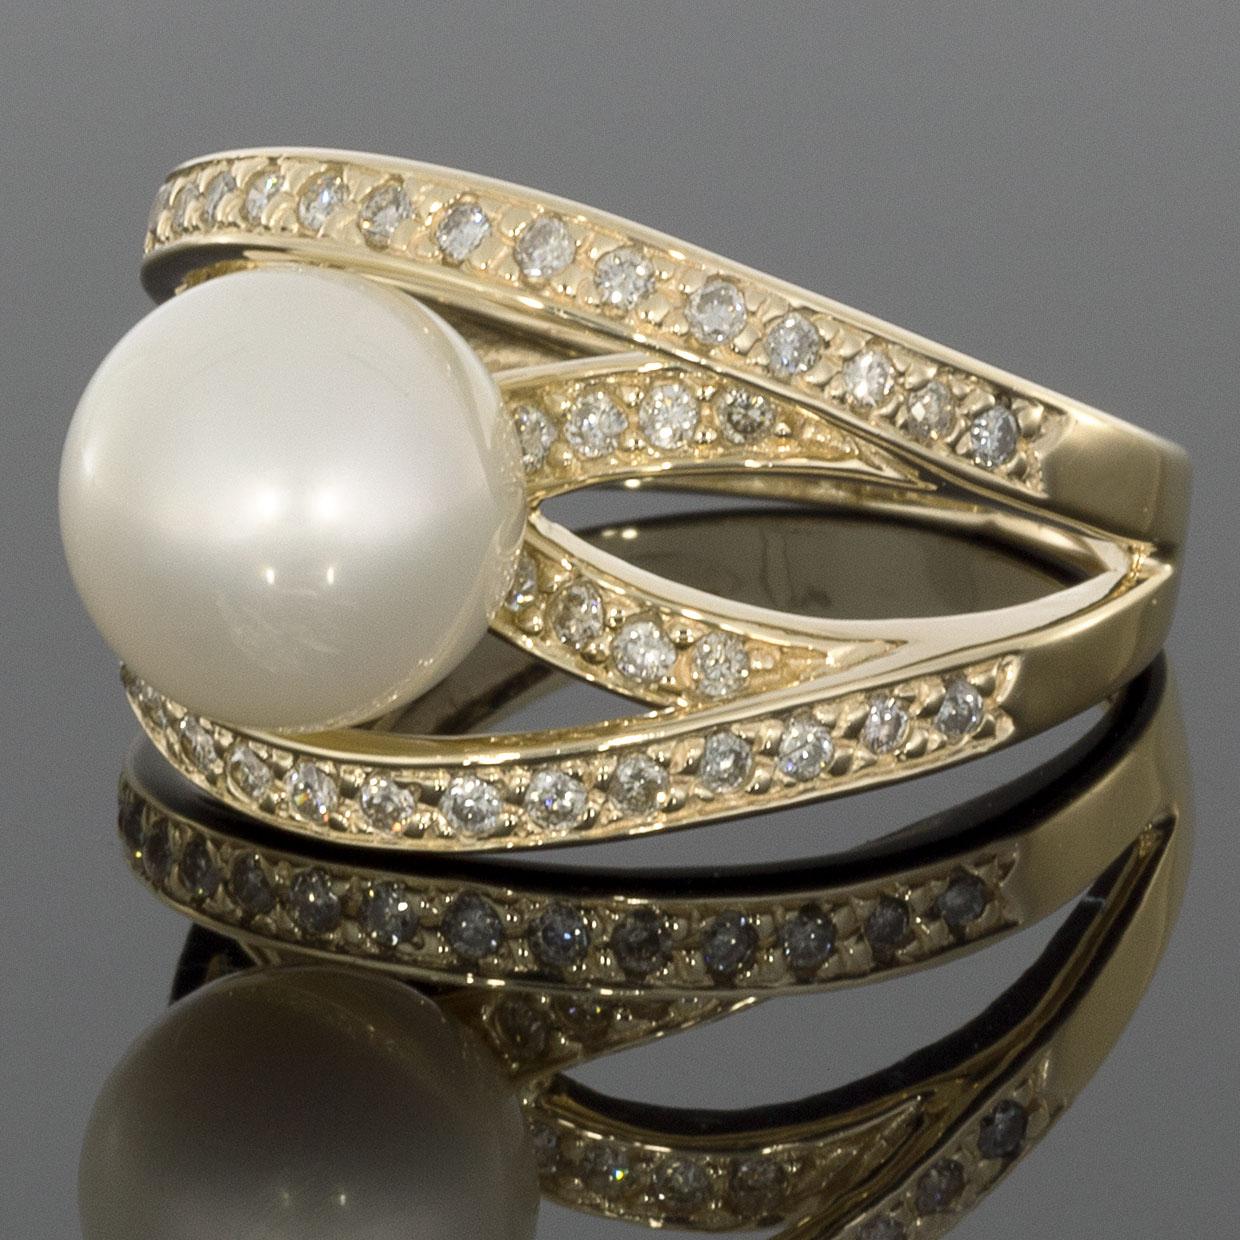 Item Details:
Estimated Retail - $2,850.00
Metal - 14 Karat Yellow Gold
Total Weight - 0.50 ctw
Style - Cocktail ring
Sizable - Yes

Stone 1 Information:
Stone Type - Pearl
Stone Shape - Akoya Cultured
Stone Color - White
Count - 1

Stone 2